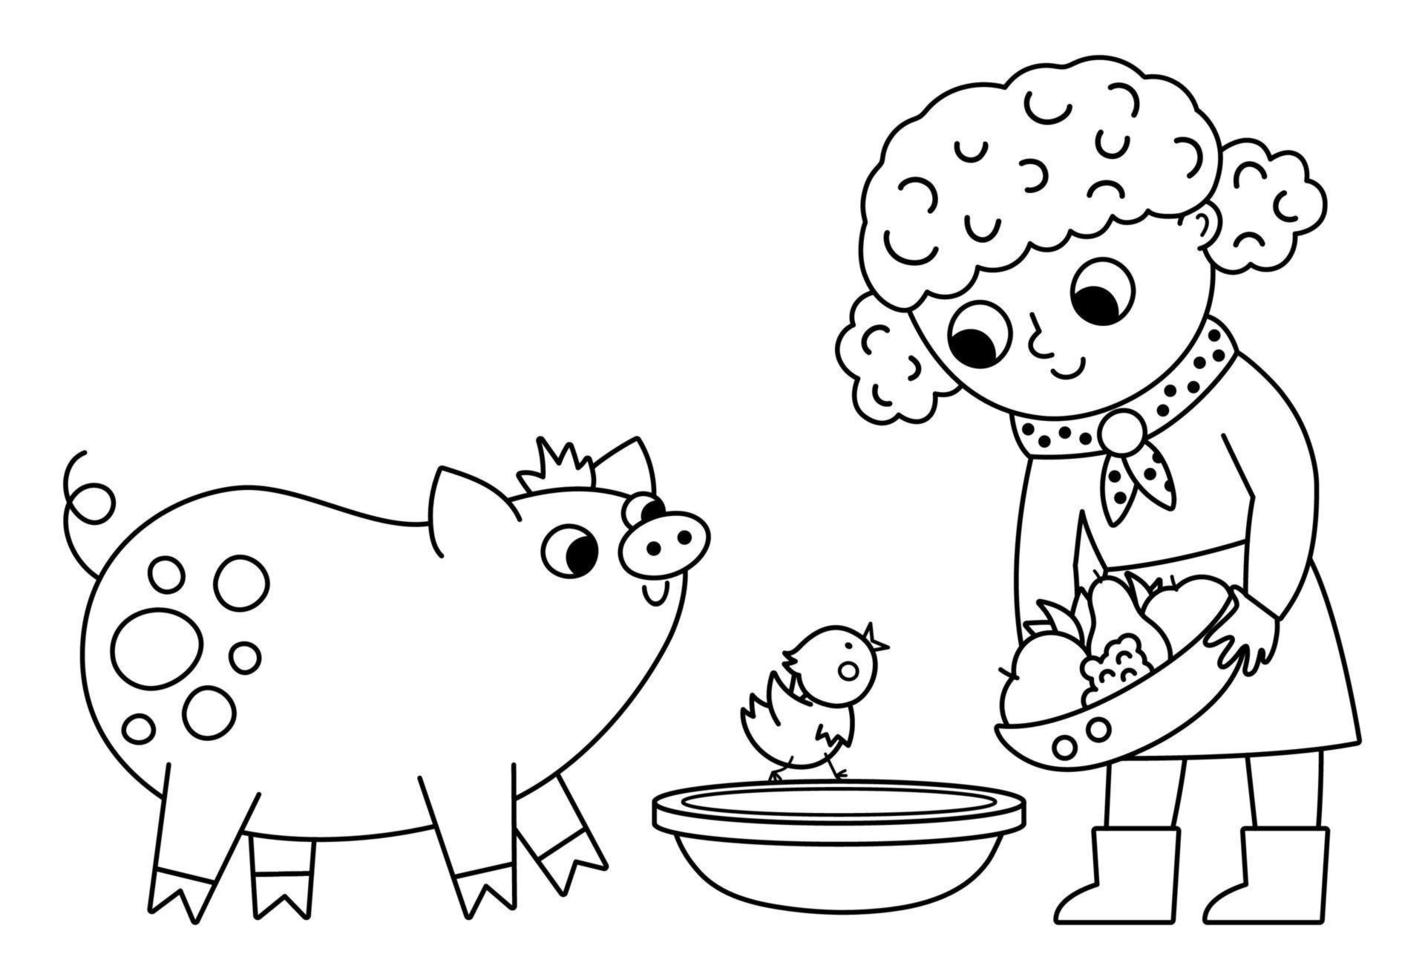 Outline farmer girl feeding animals. Vector black and white cattle breeder icon. Cute kid doing agricultural work. Child with cute pig. Funny farm illustration or coloring page